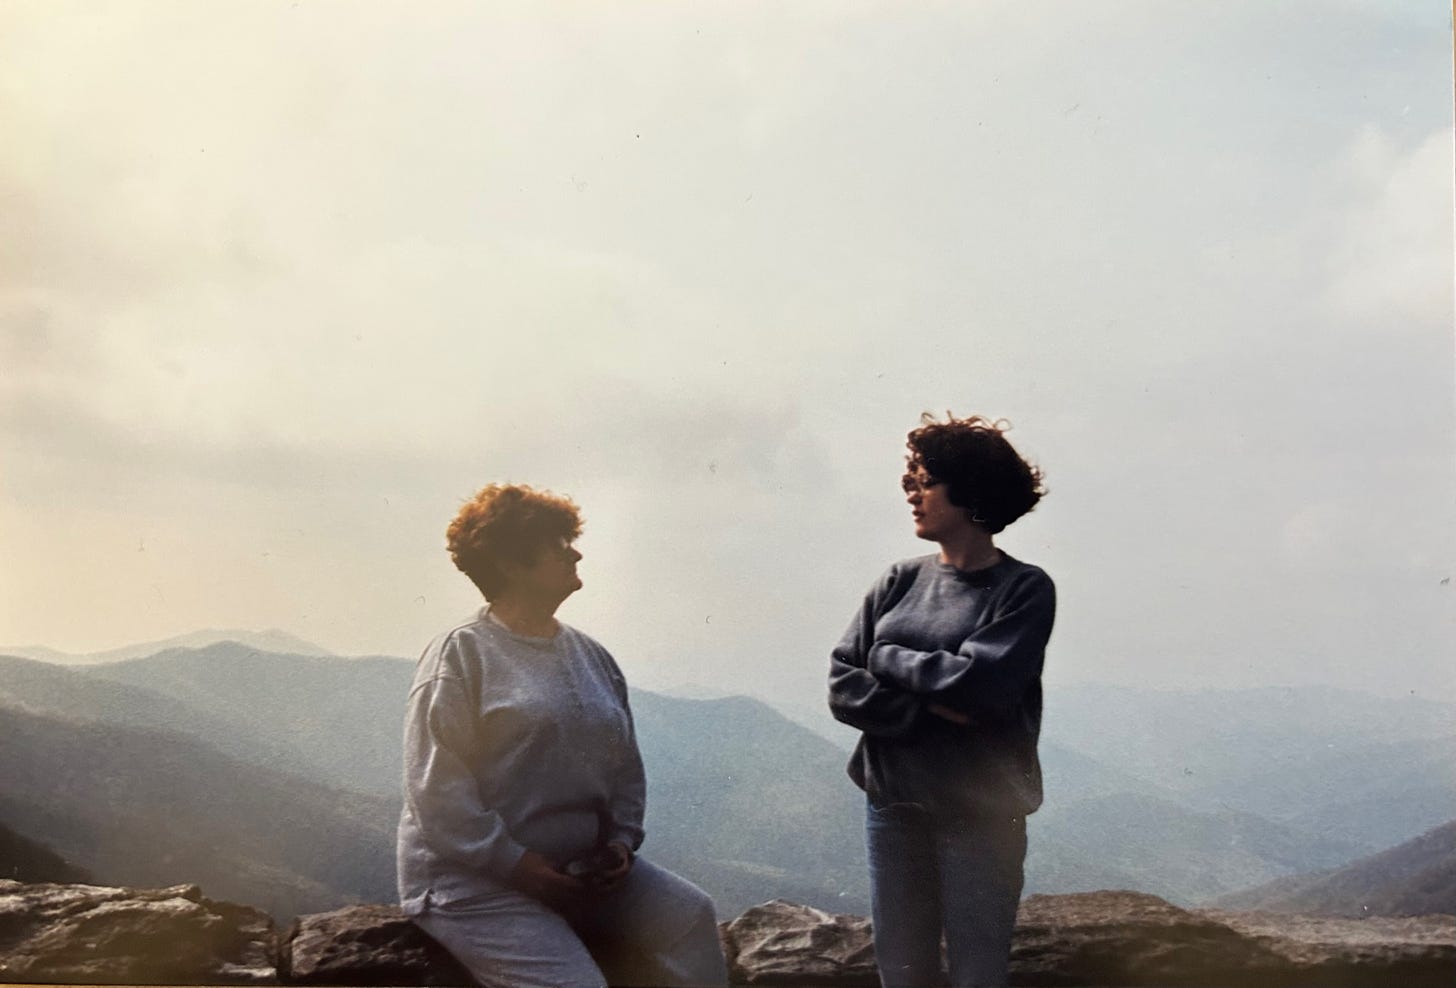 Two women, one older and one younger, both white, both wearing gray sweaters and jeans, in front of the Blue Ridge Mountains